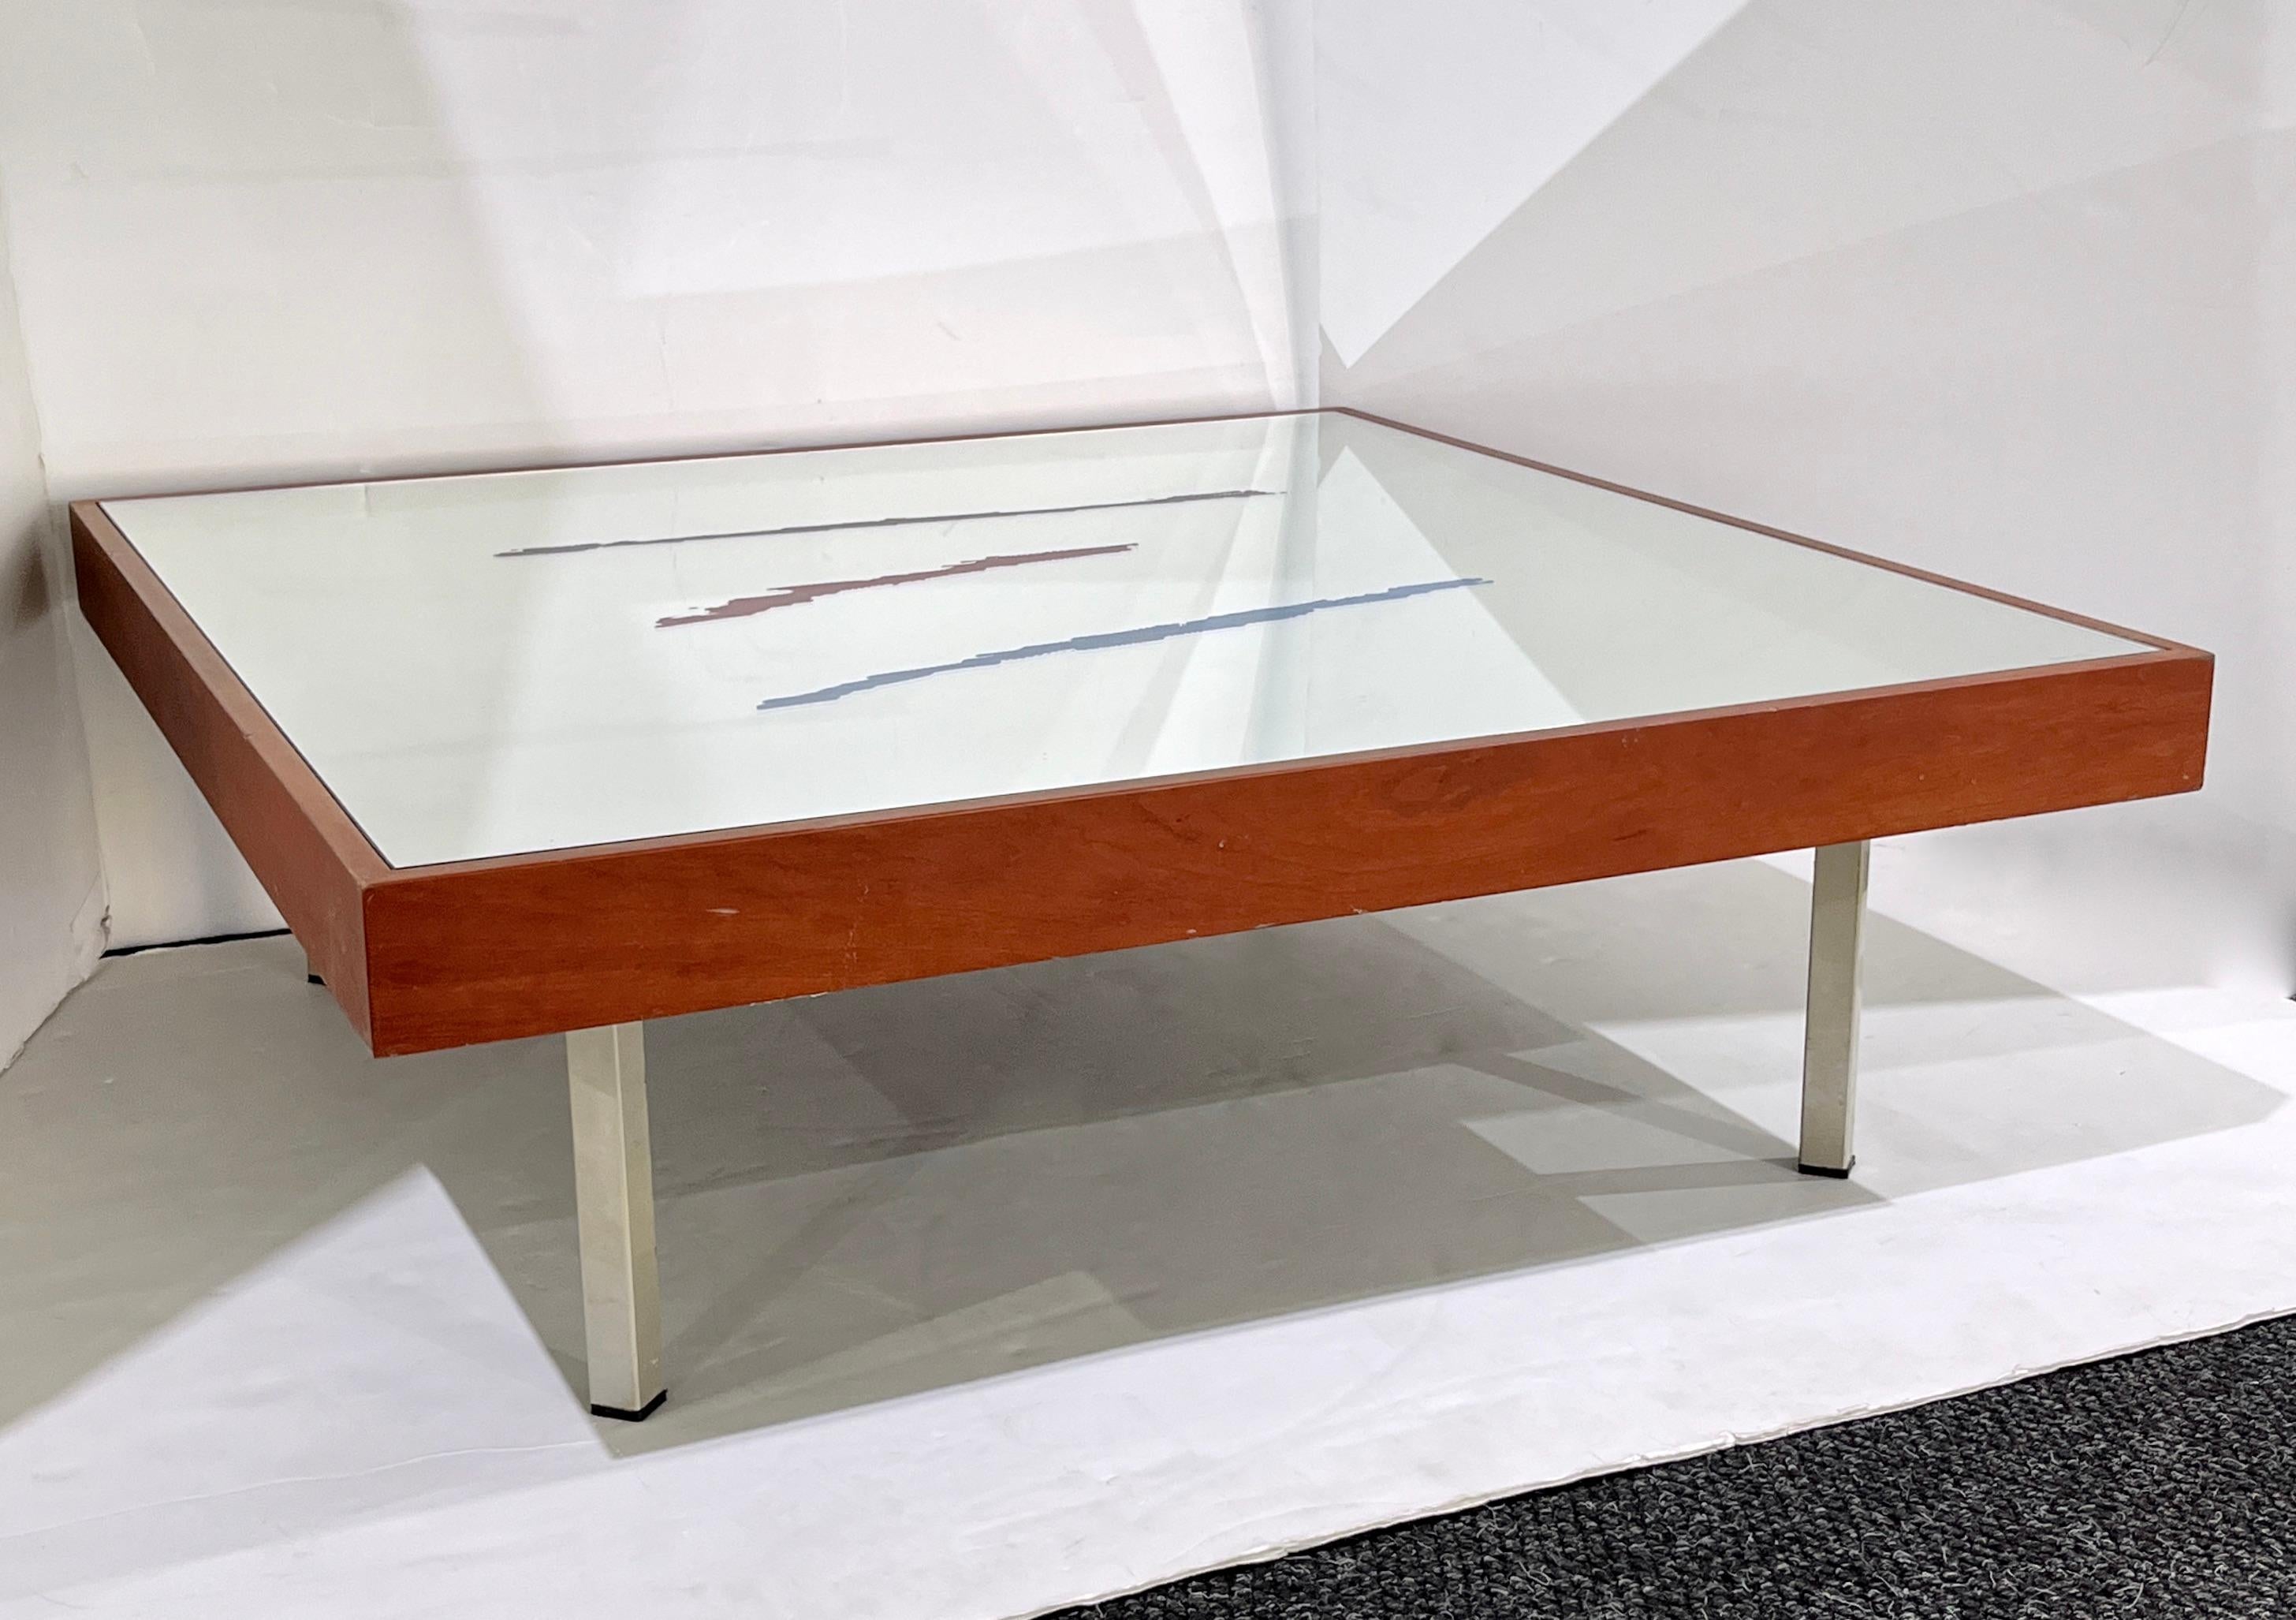 1970s Italian Post-Modern Pair of Mirrored Cherry Wood Eglomise Coffee Tables  In Good Condition For Sale In New York, NY